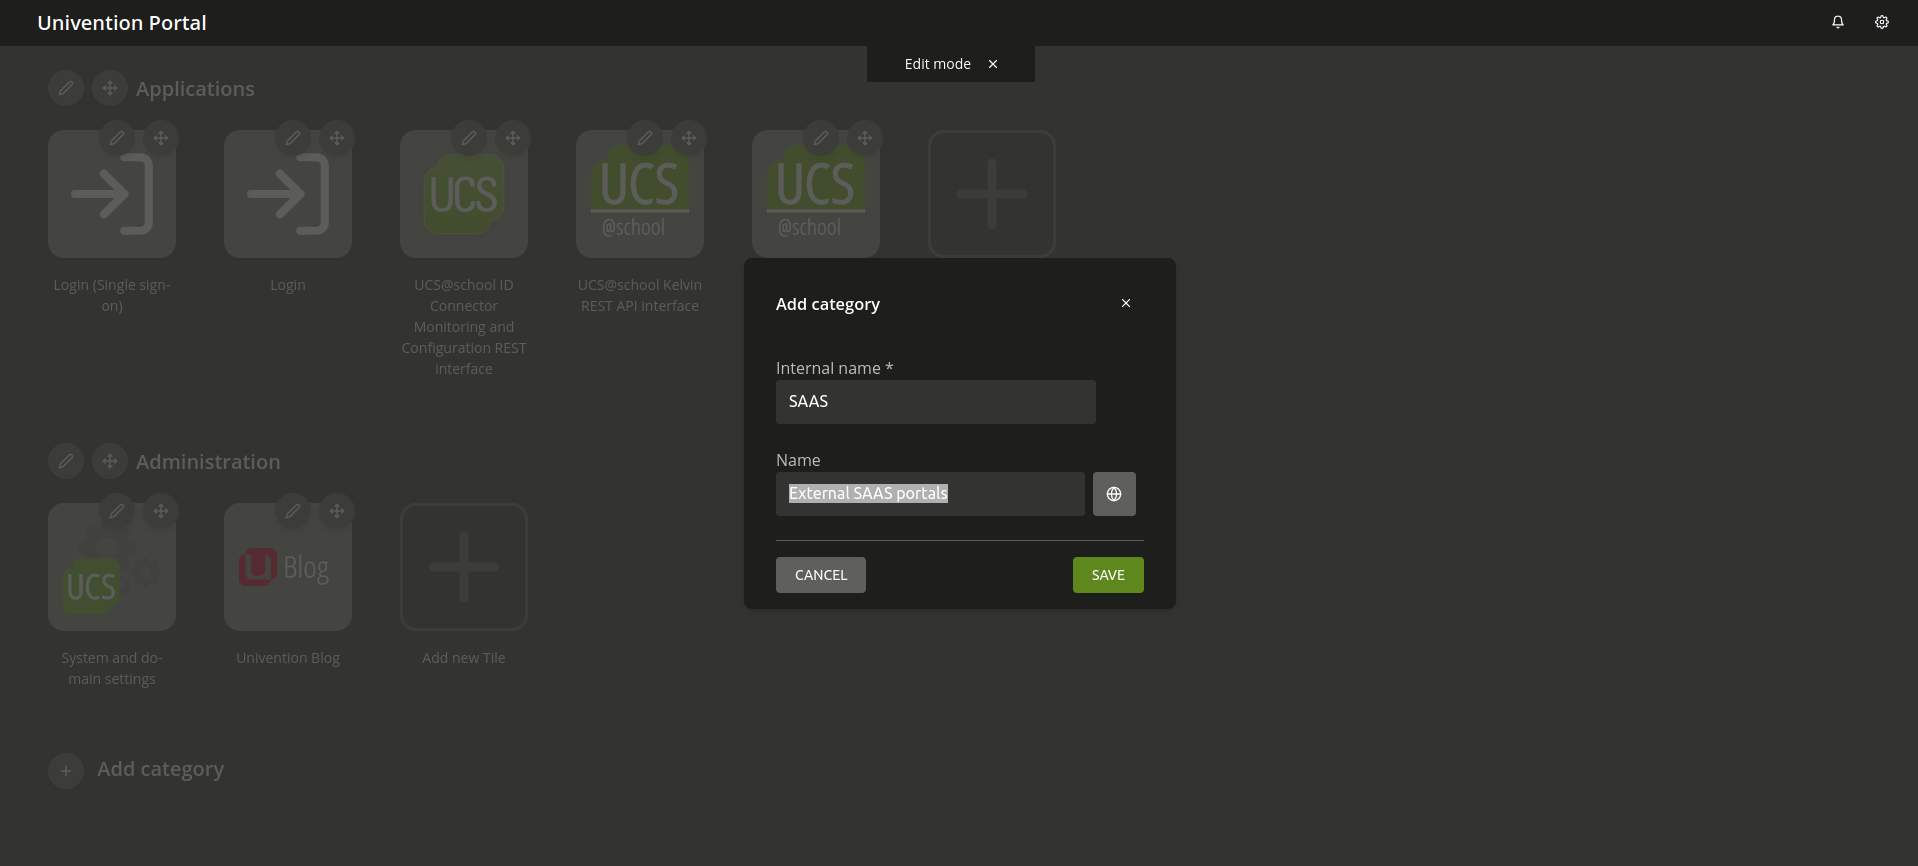 Graphical edit mode of the portal in UCS 5